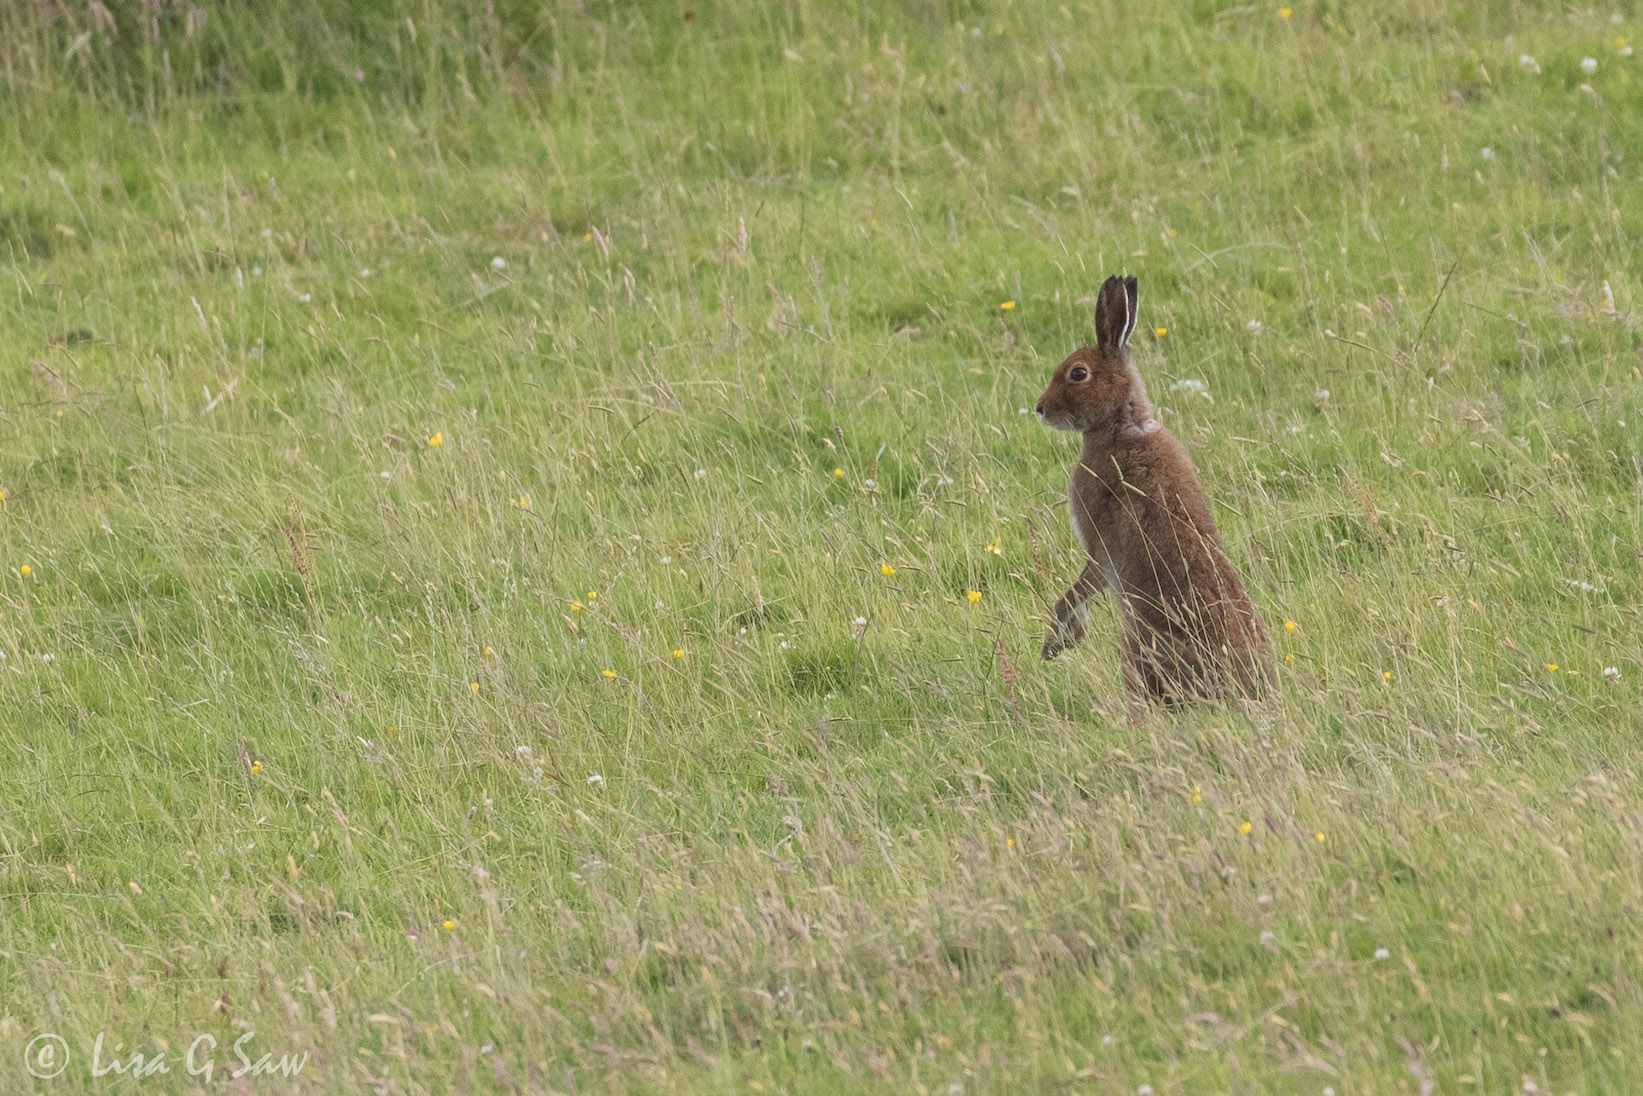 Mountain Hare on hind legs in summer